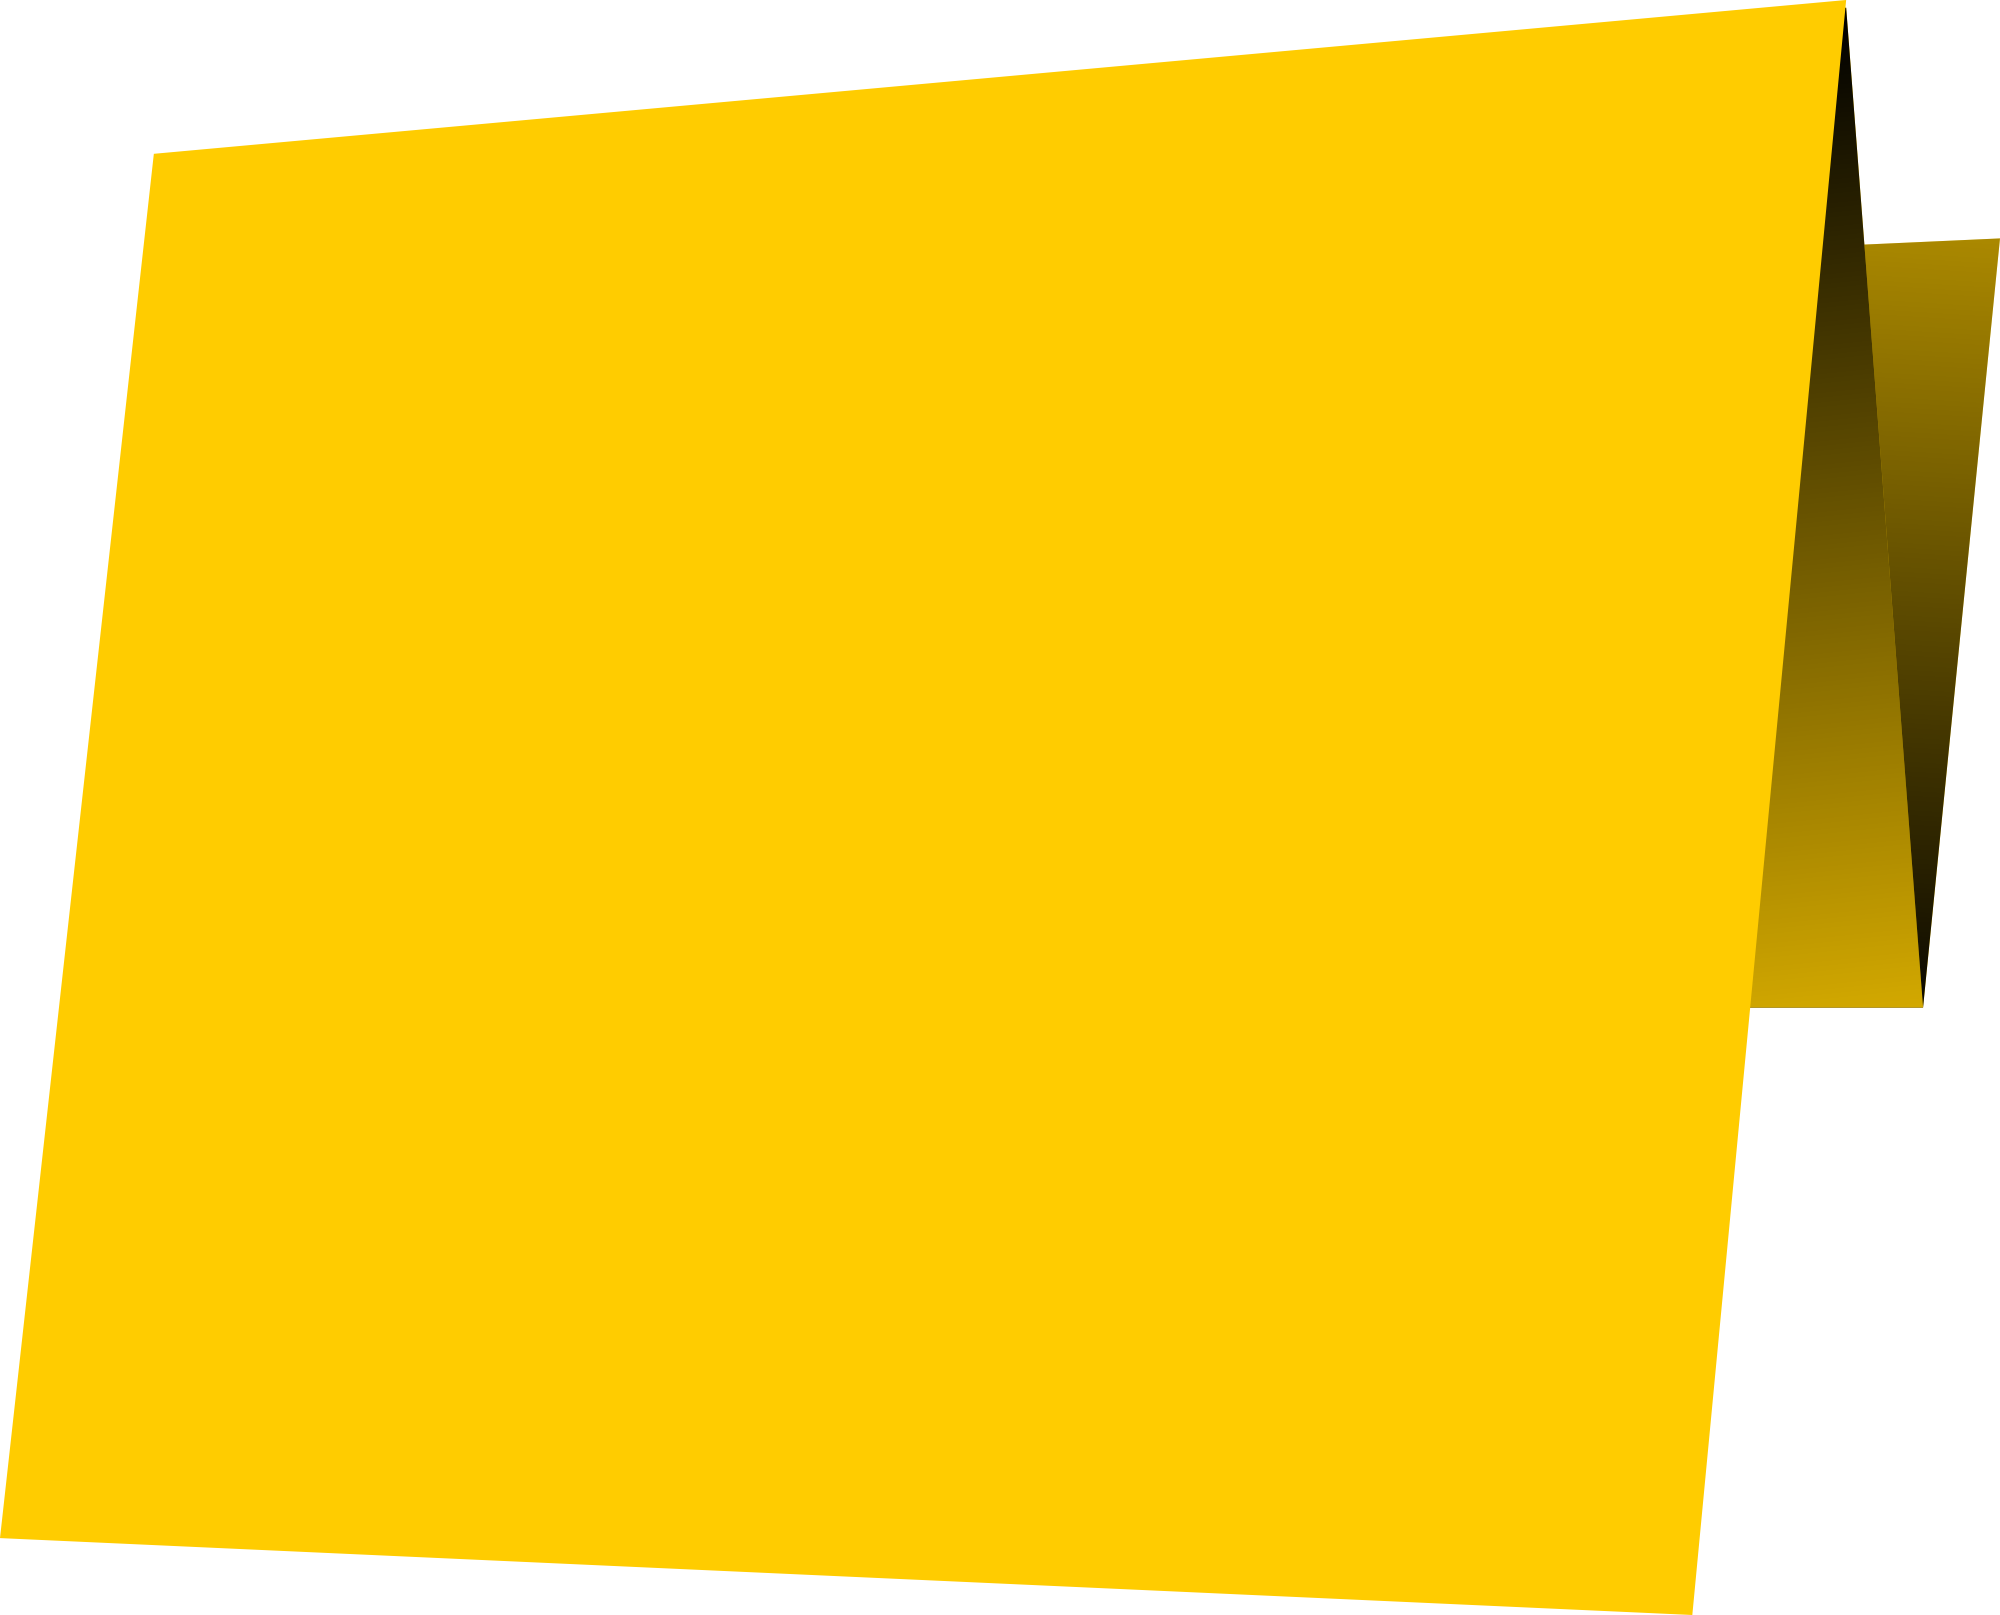 Gold Banner PNG Picture